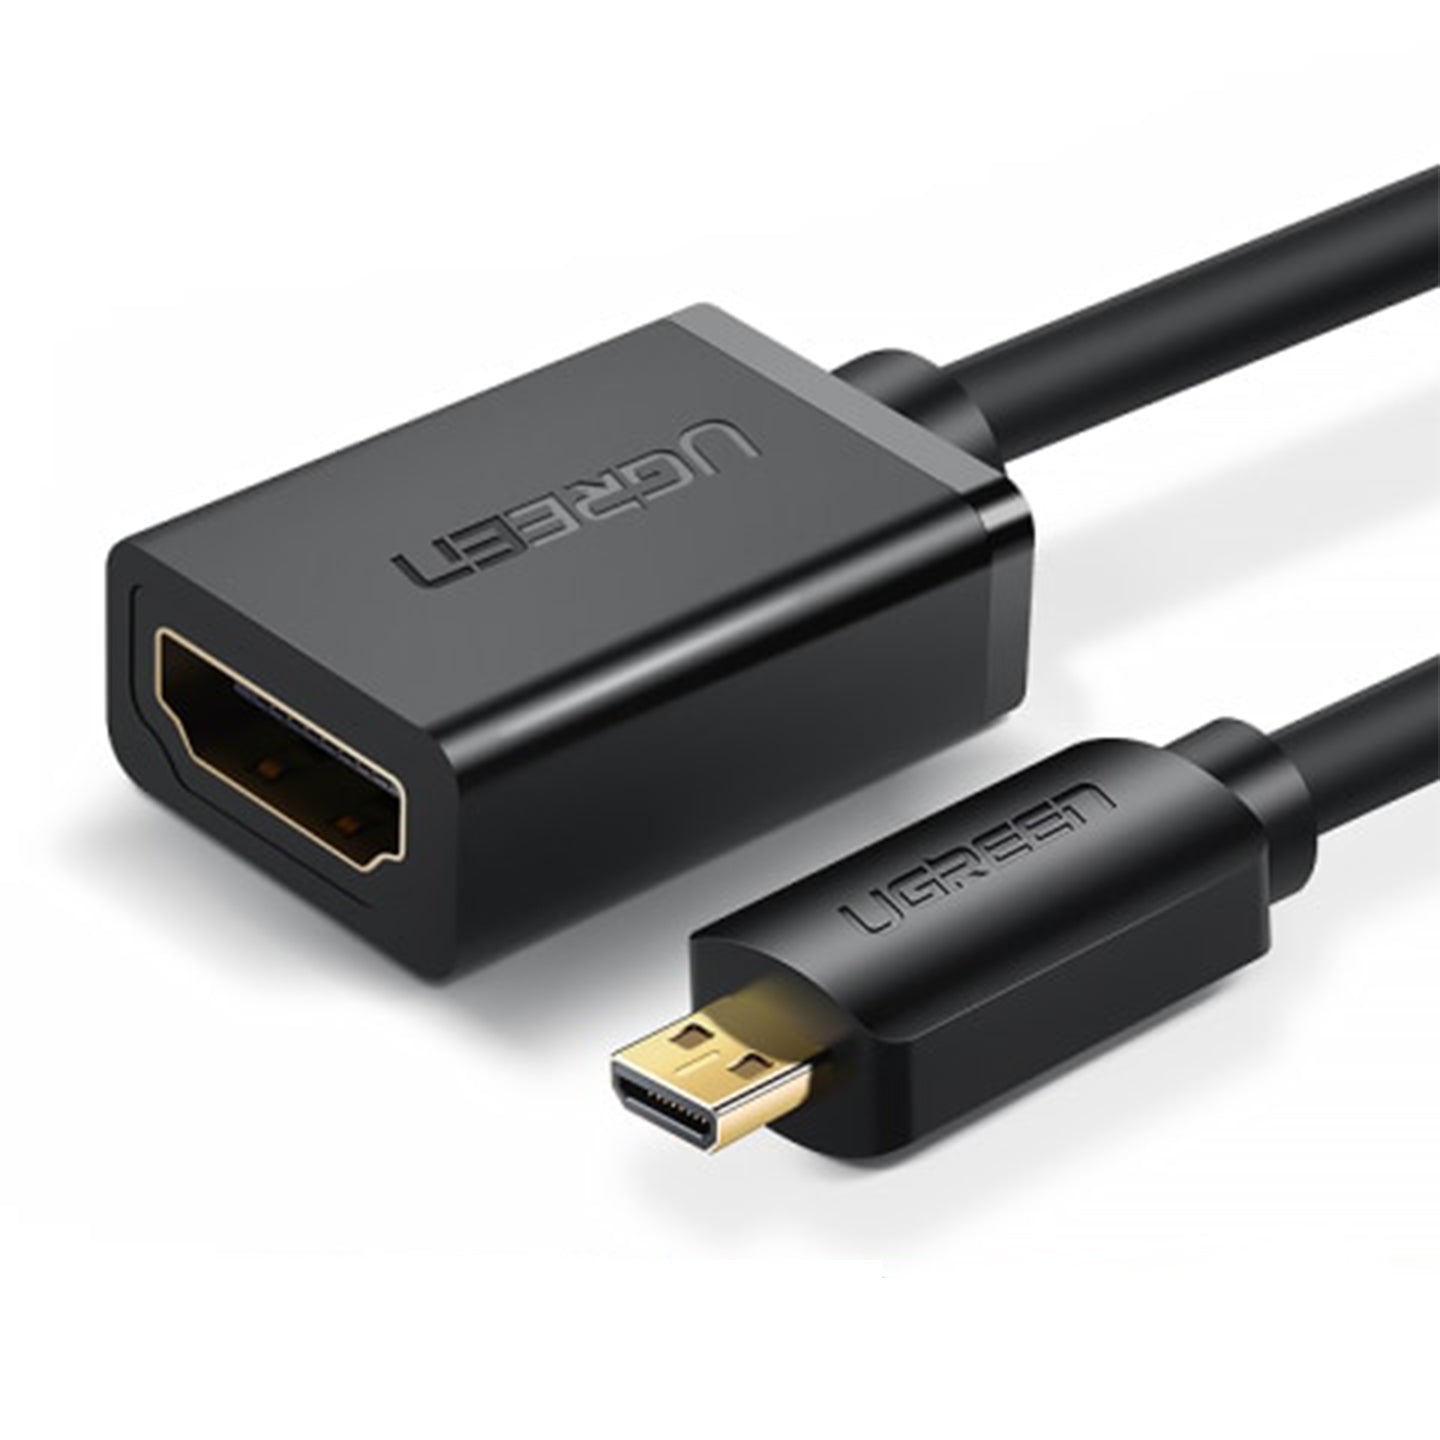  UGREEN Micro HDMI to HDMI Adapter, Male to Female